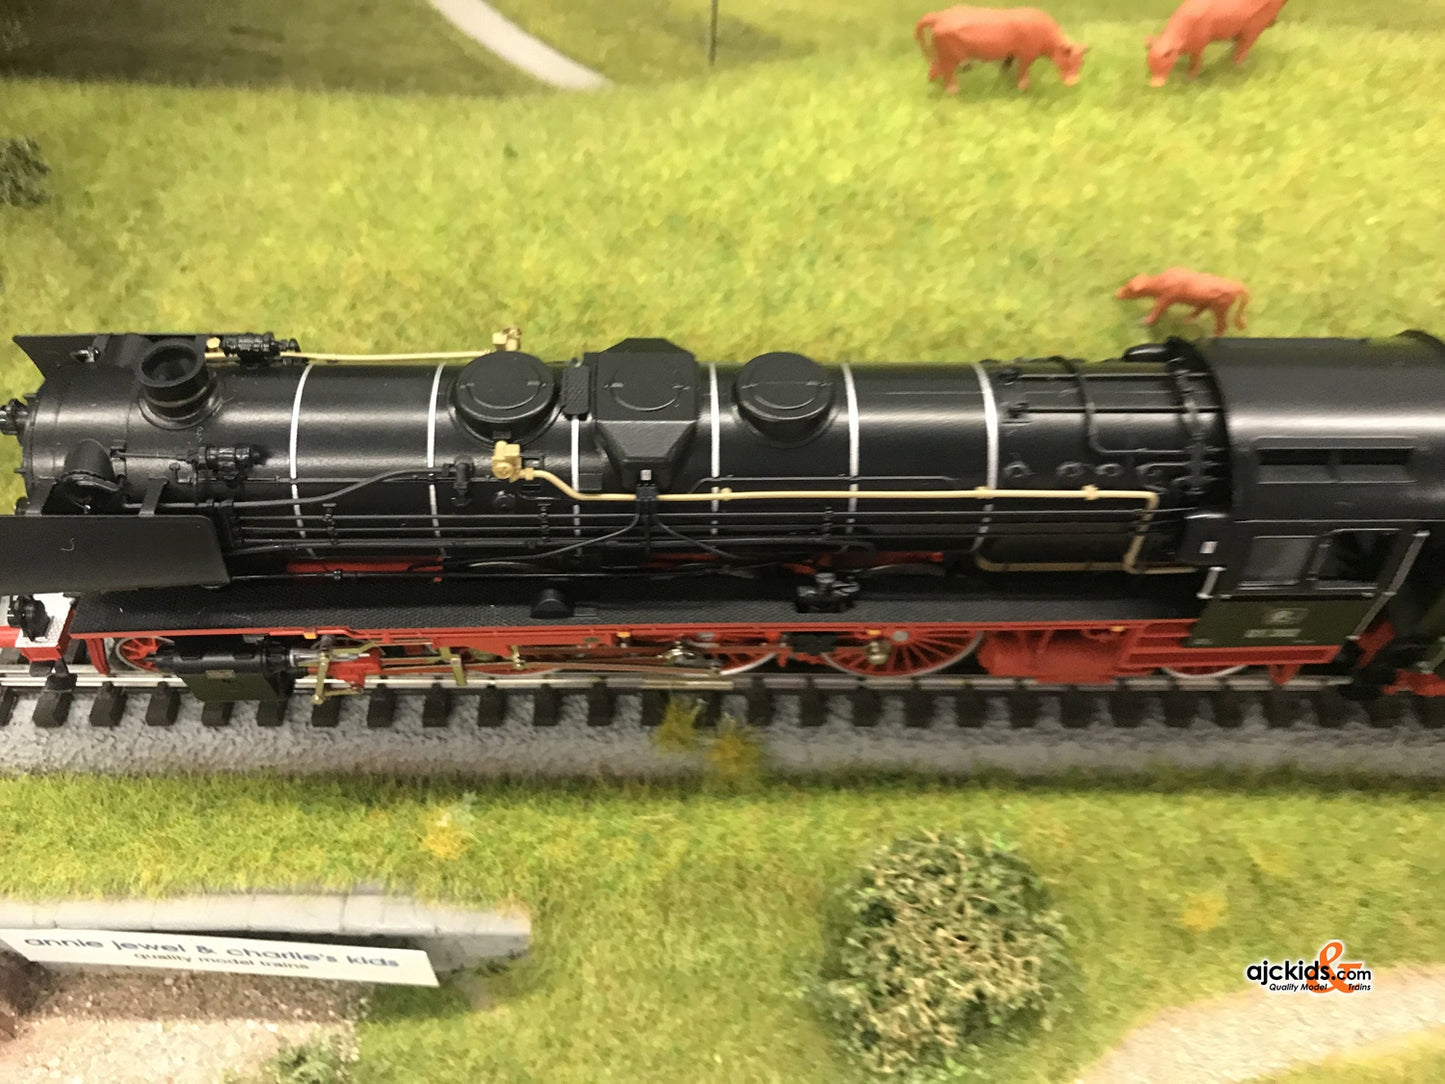 Marklin 39005 - Express Steam Locomotive with a Tender, Road Number 01 202